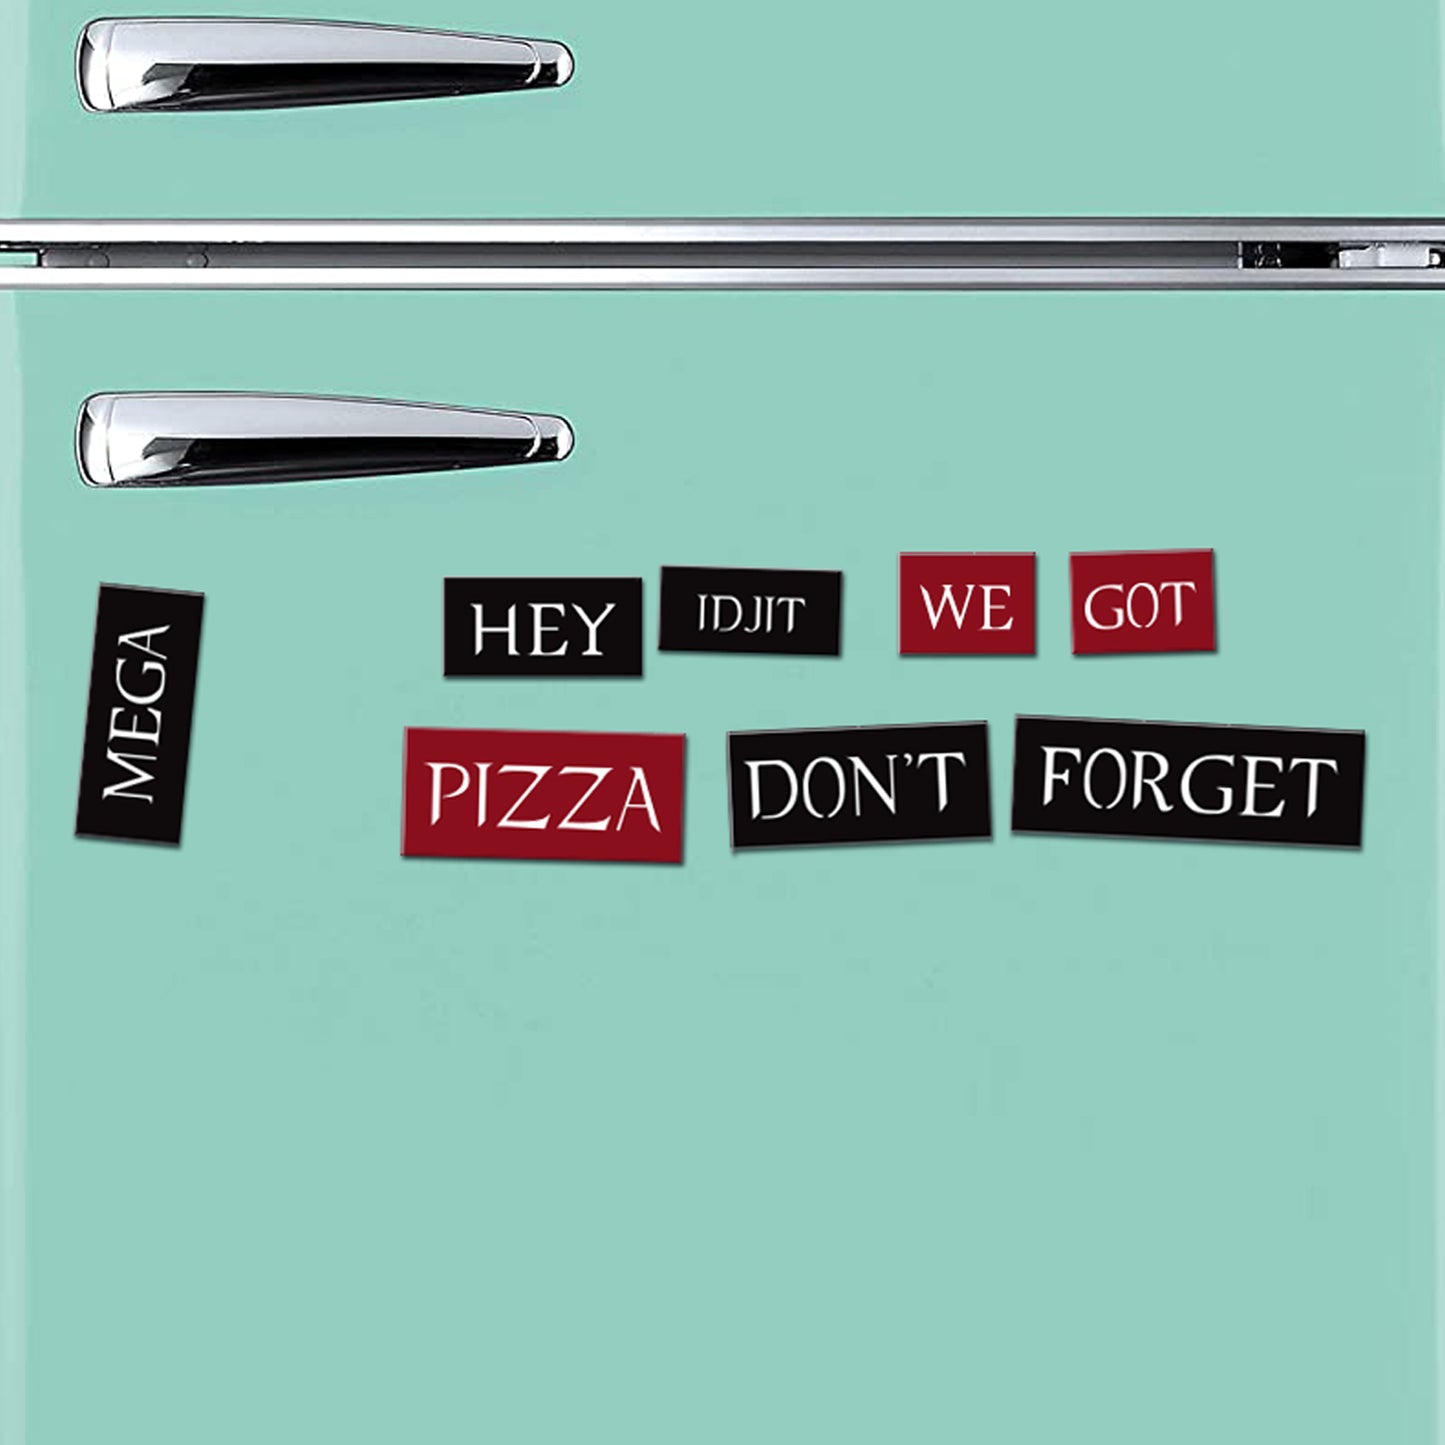 A refrigerator close-up with words "mega" and separately grouped together: "Hey Idjit we got pizza don't forget" in rectangular magnets.